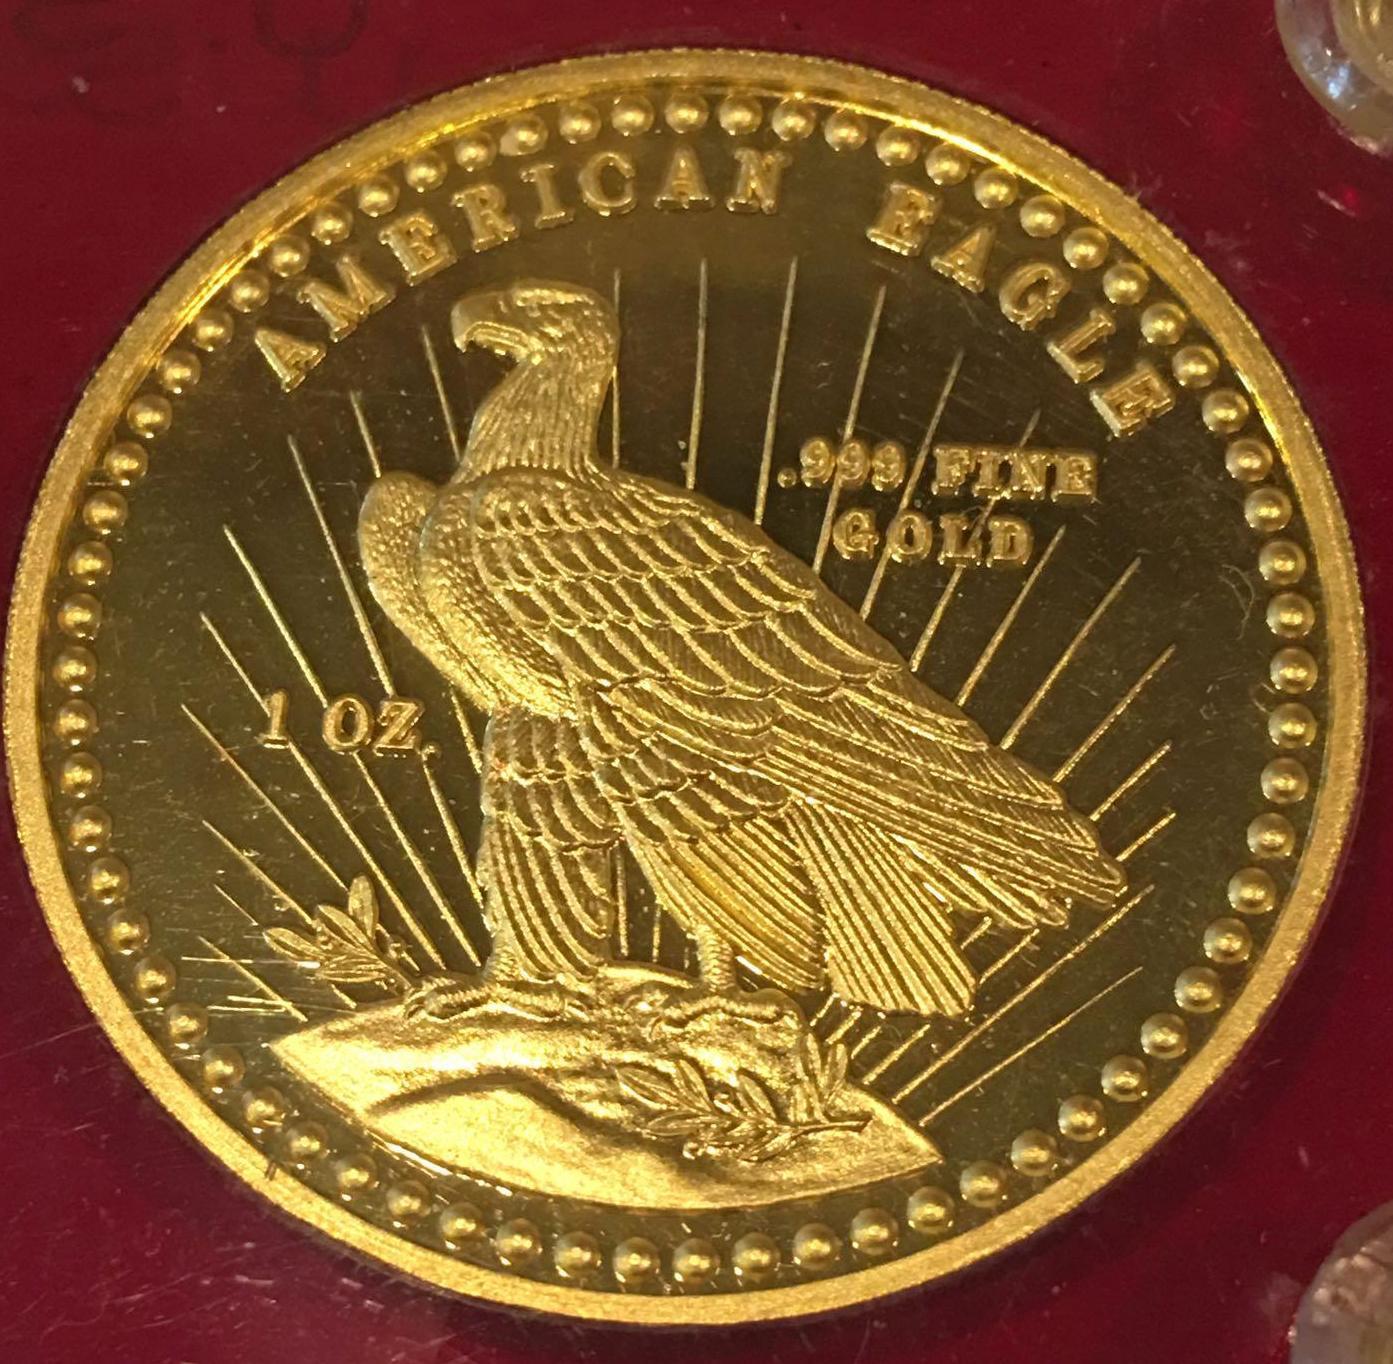 GOLD 1980-1981 US American Eagle 5 Coin Set